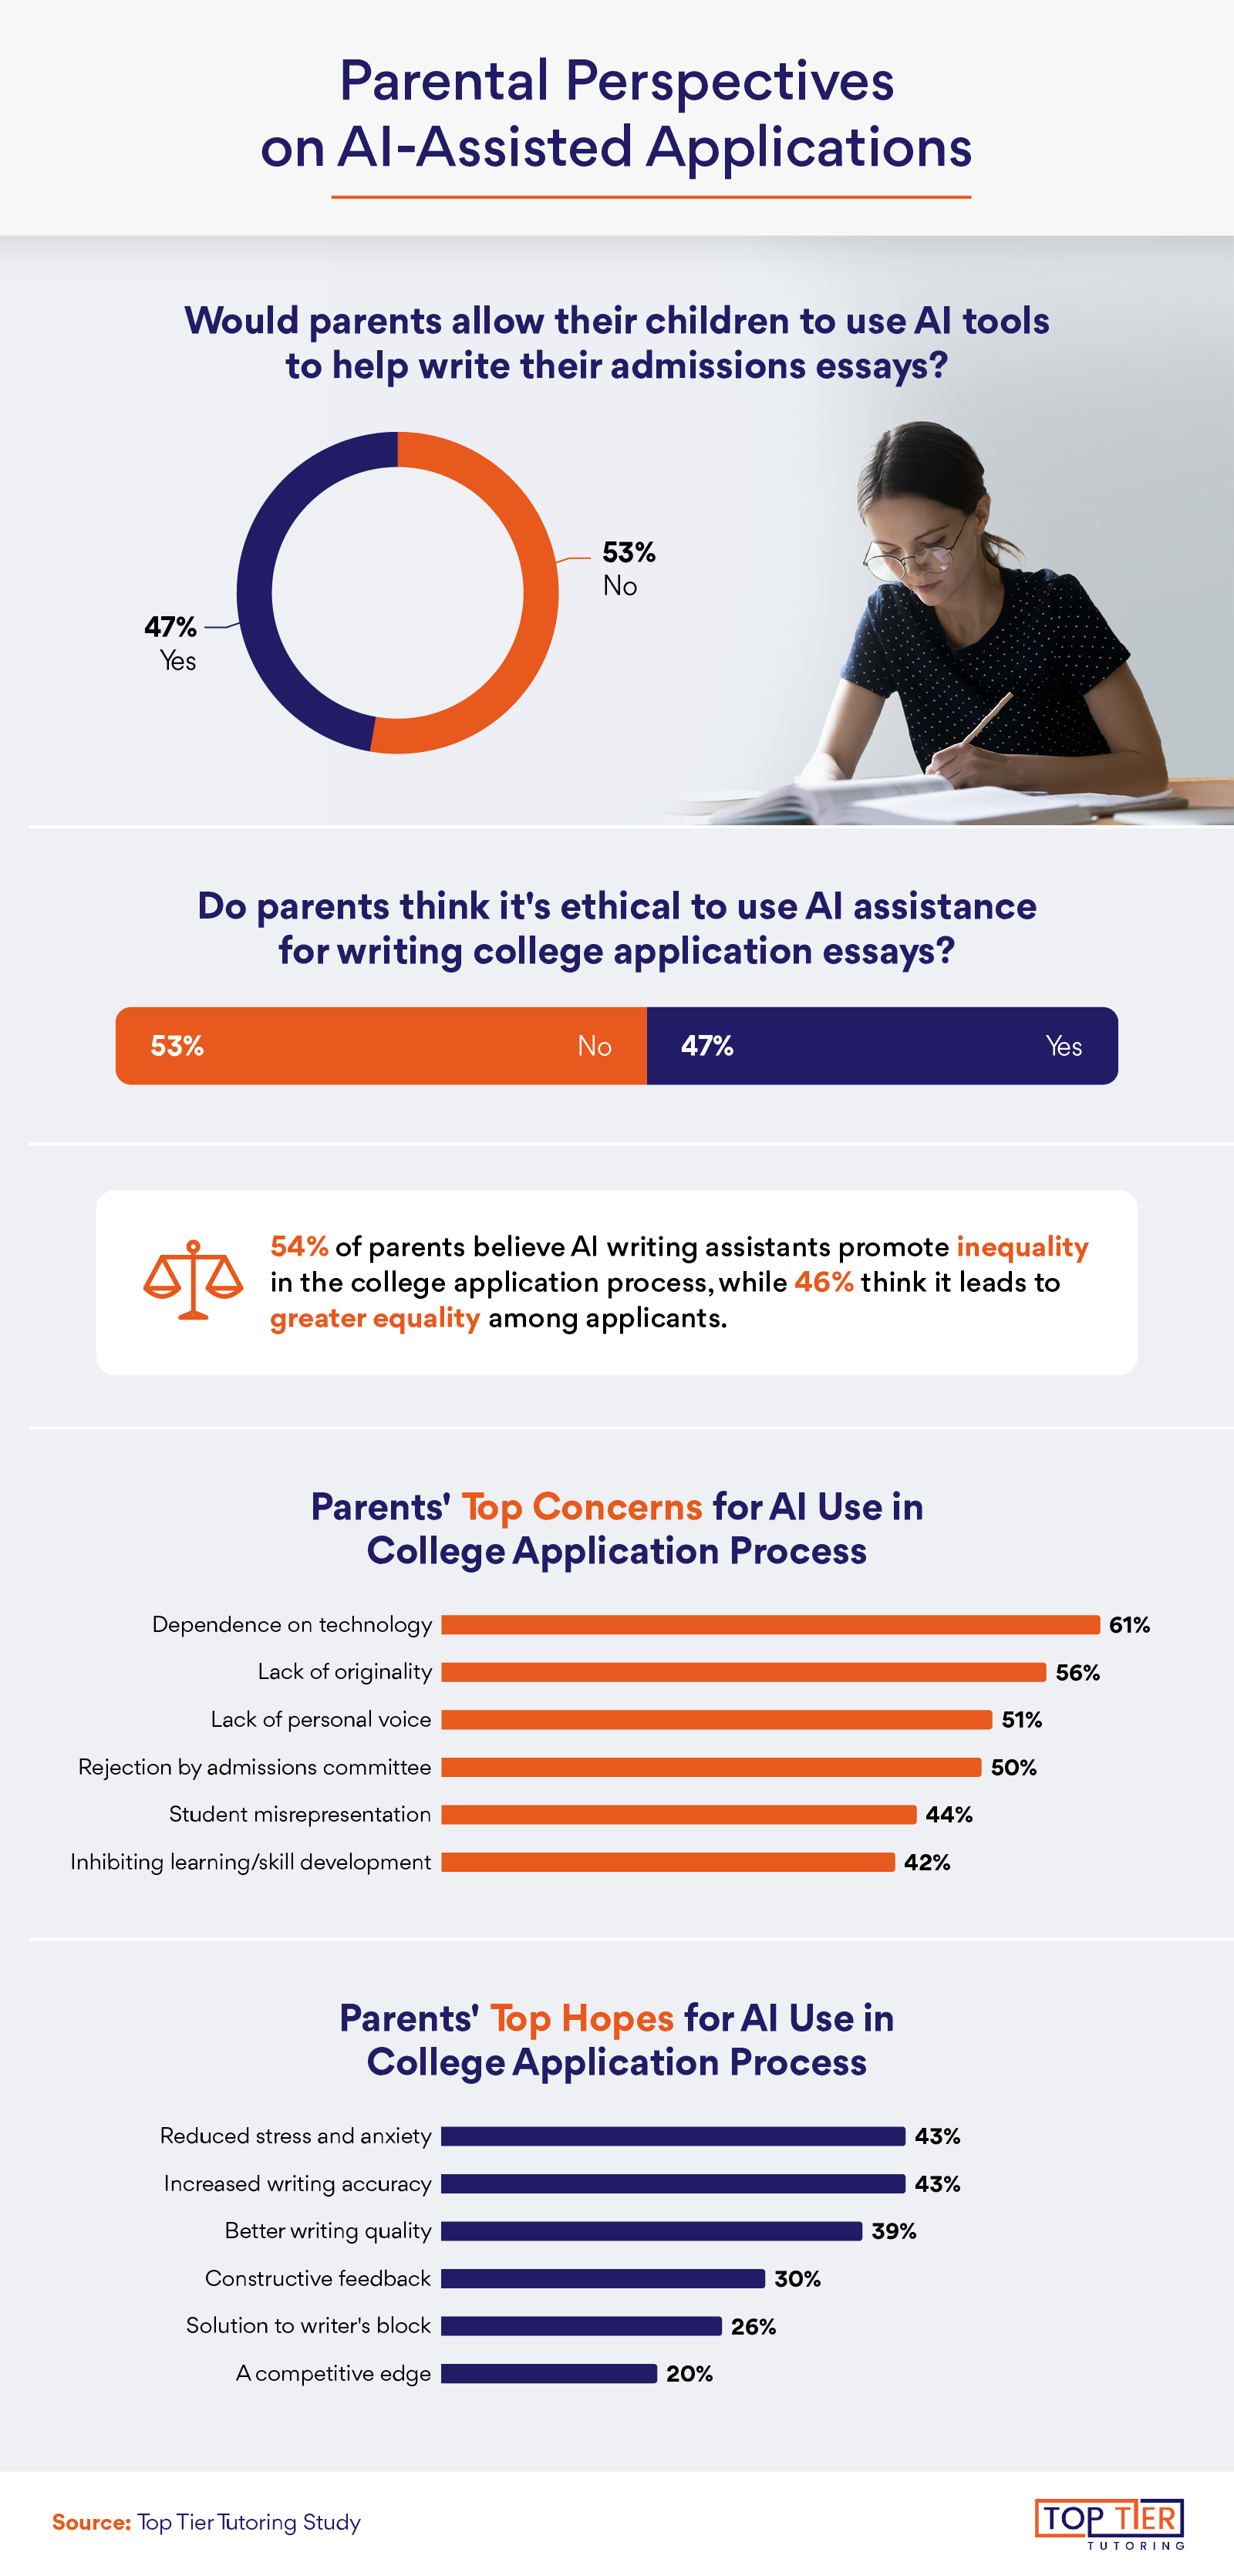 This image explores parents perspectives towards using AI to assist with admissions.